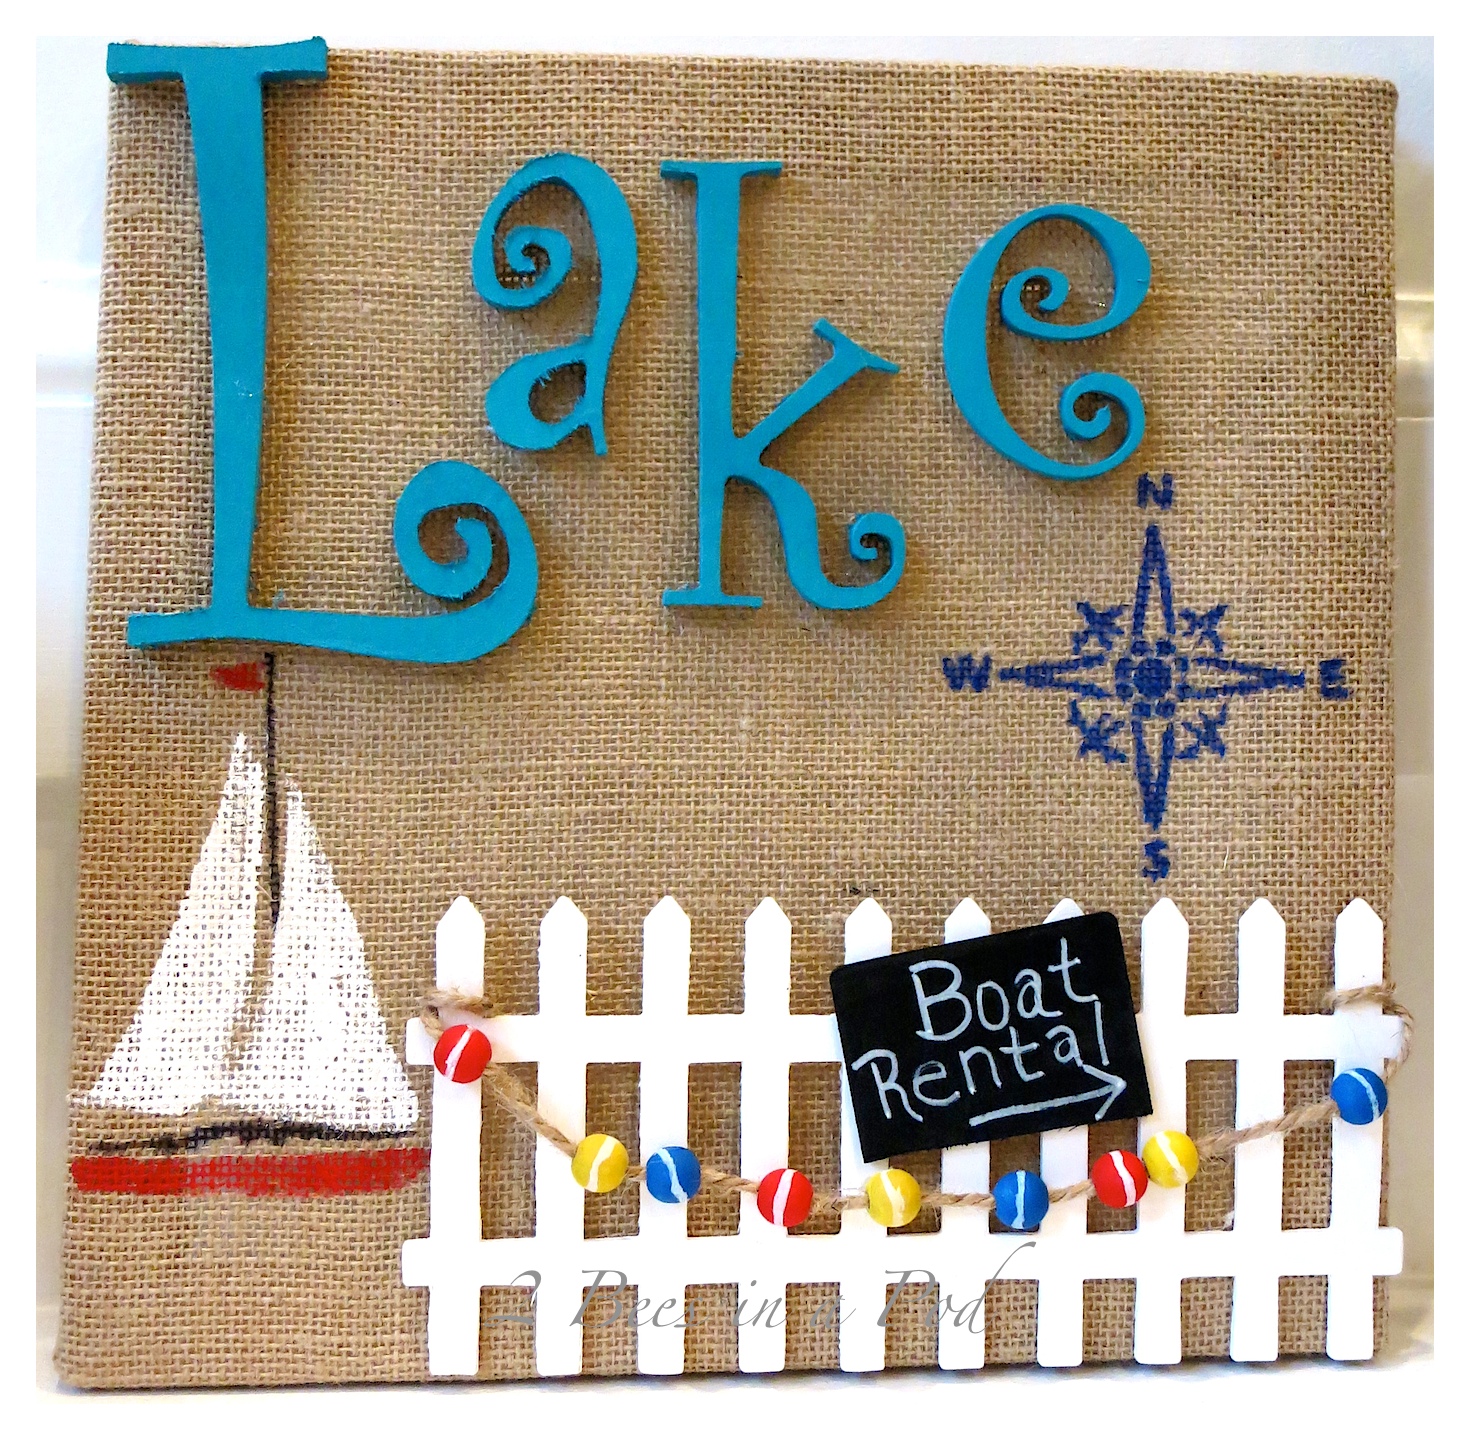 DIY Lake Wall Art - simple artwork using a wrapped burlap canvas, decorative wood pieces and paint. Ready to display your lake scene.